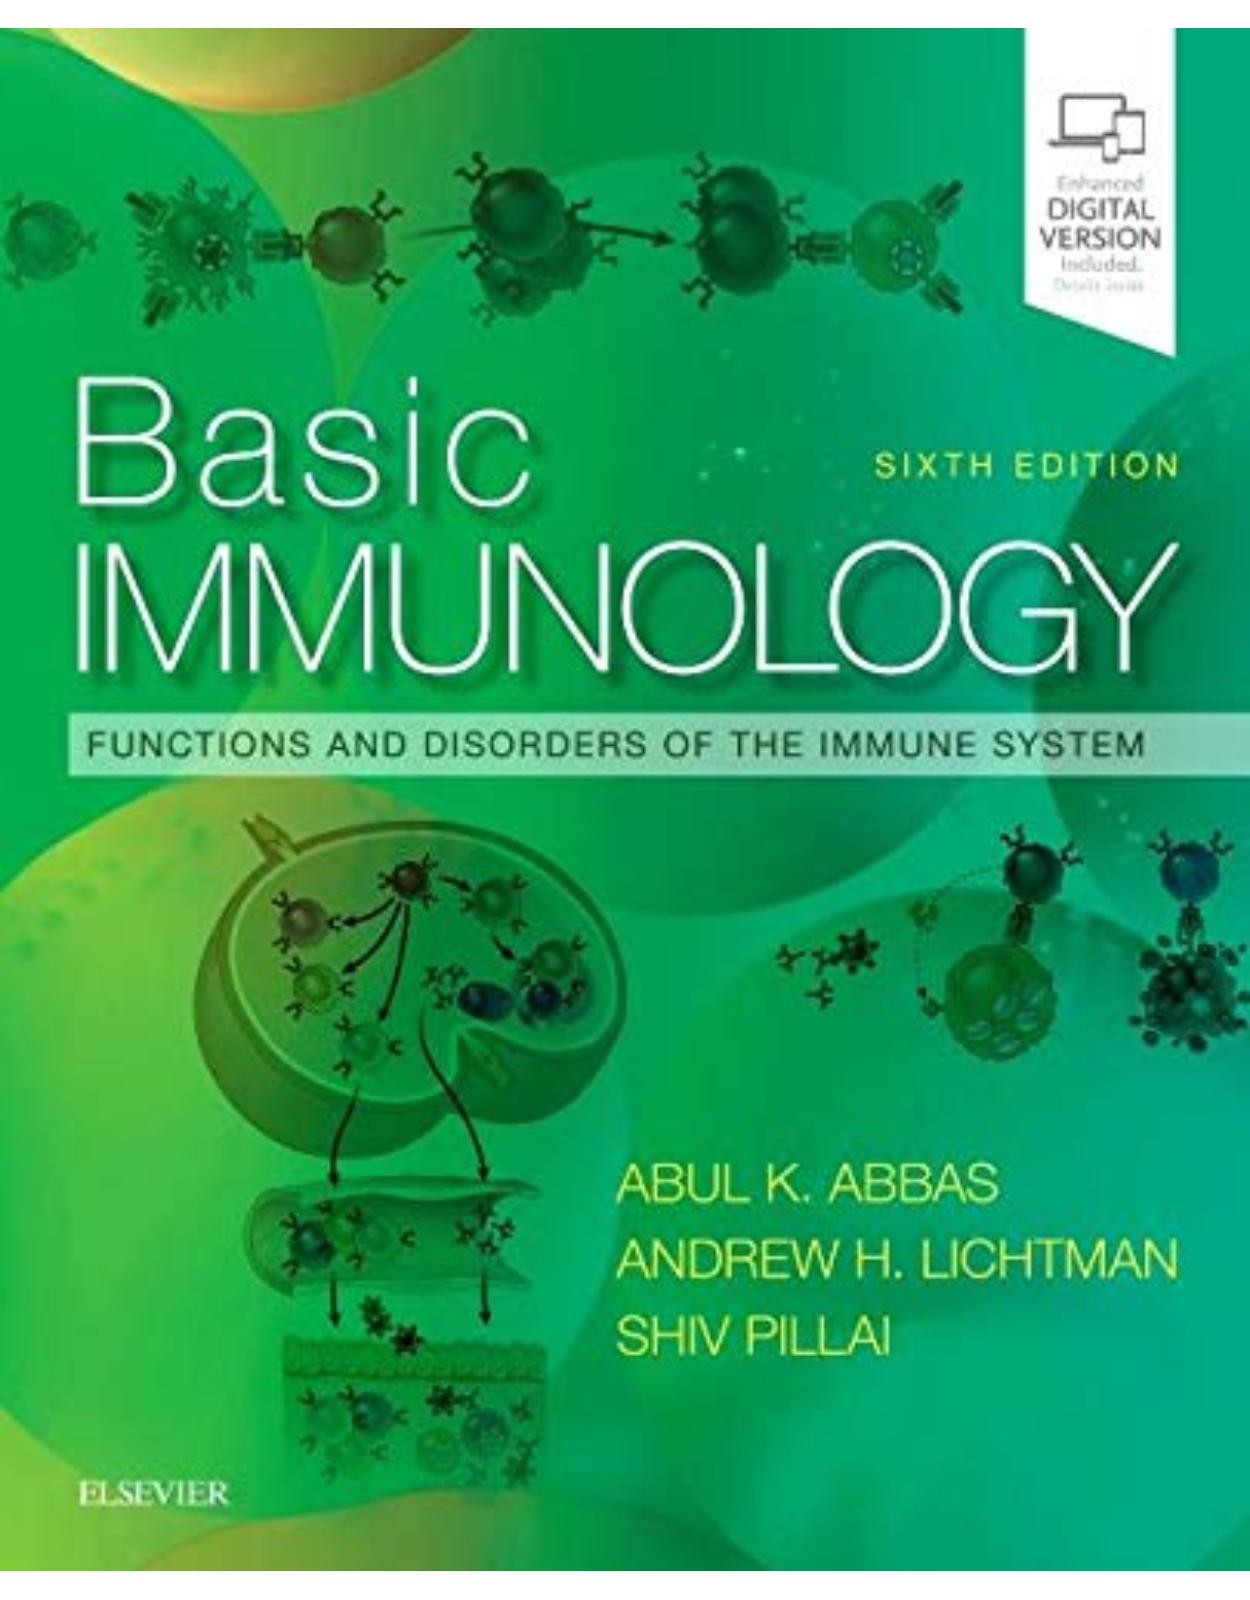 Basic Immunology, Functions and Disorders of the Immune System, 6th Edition